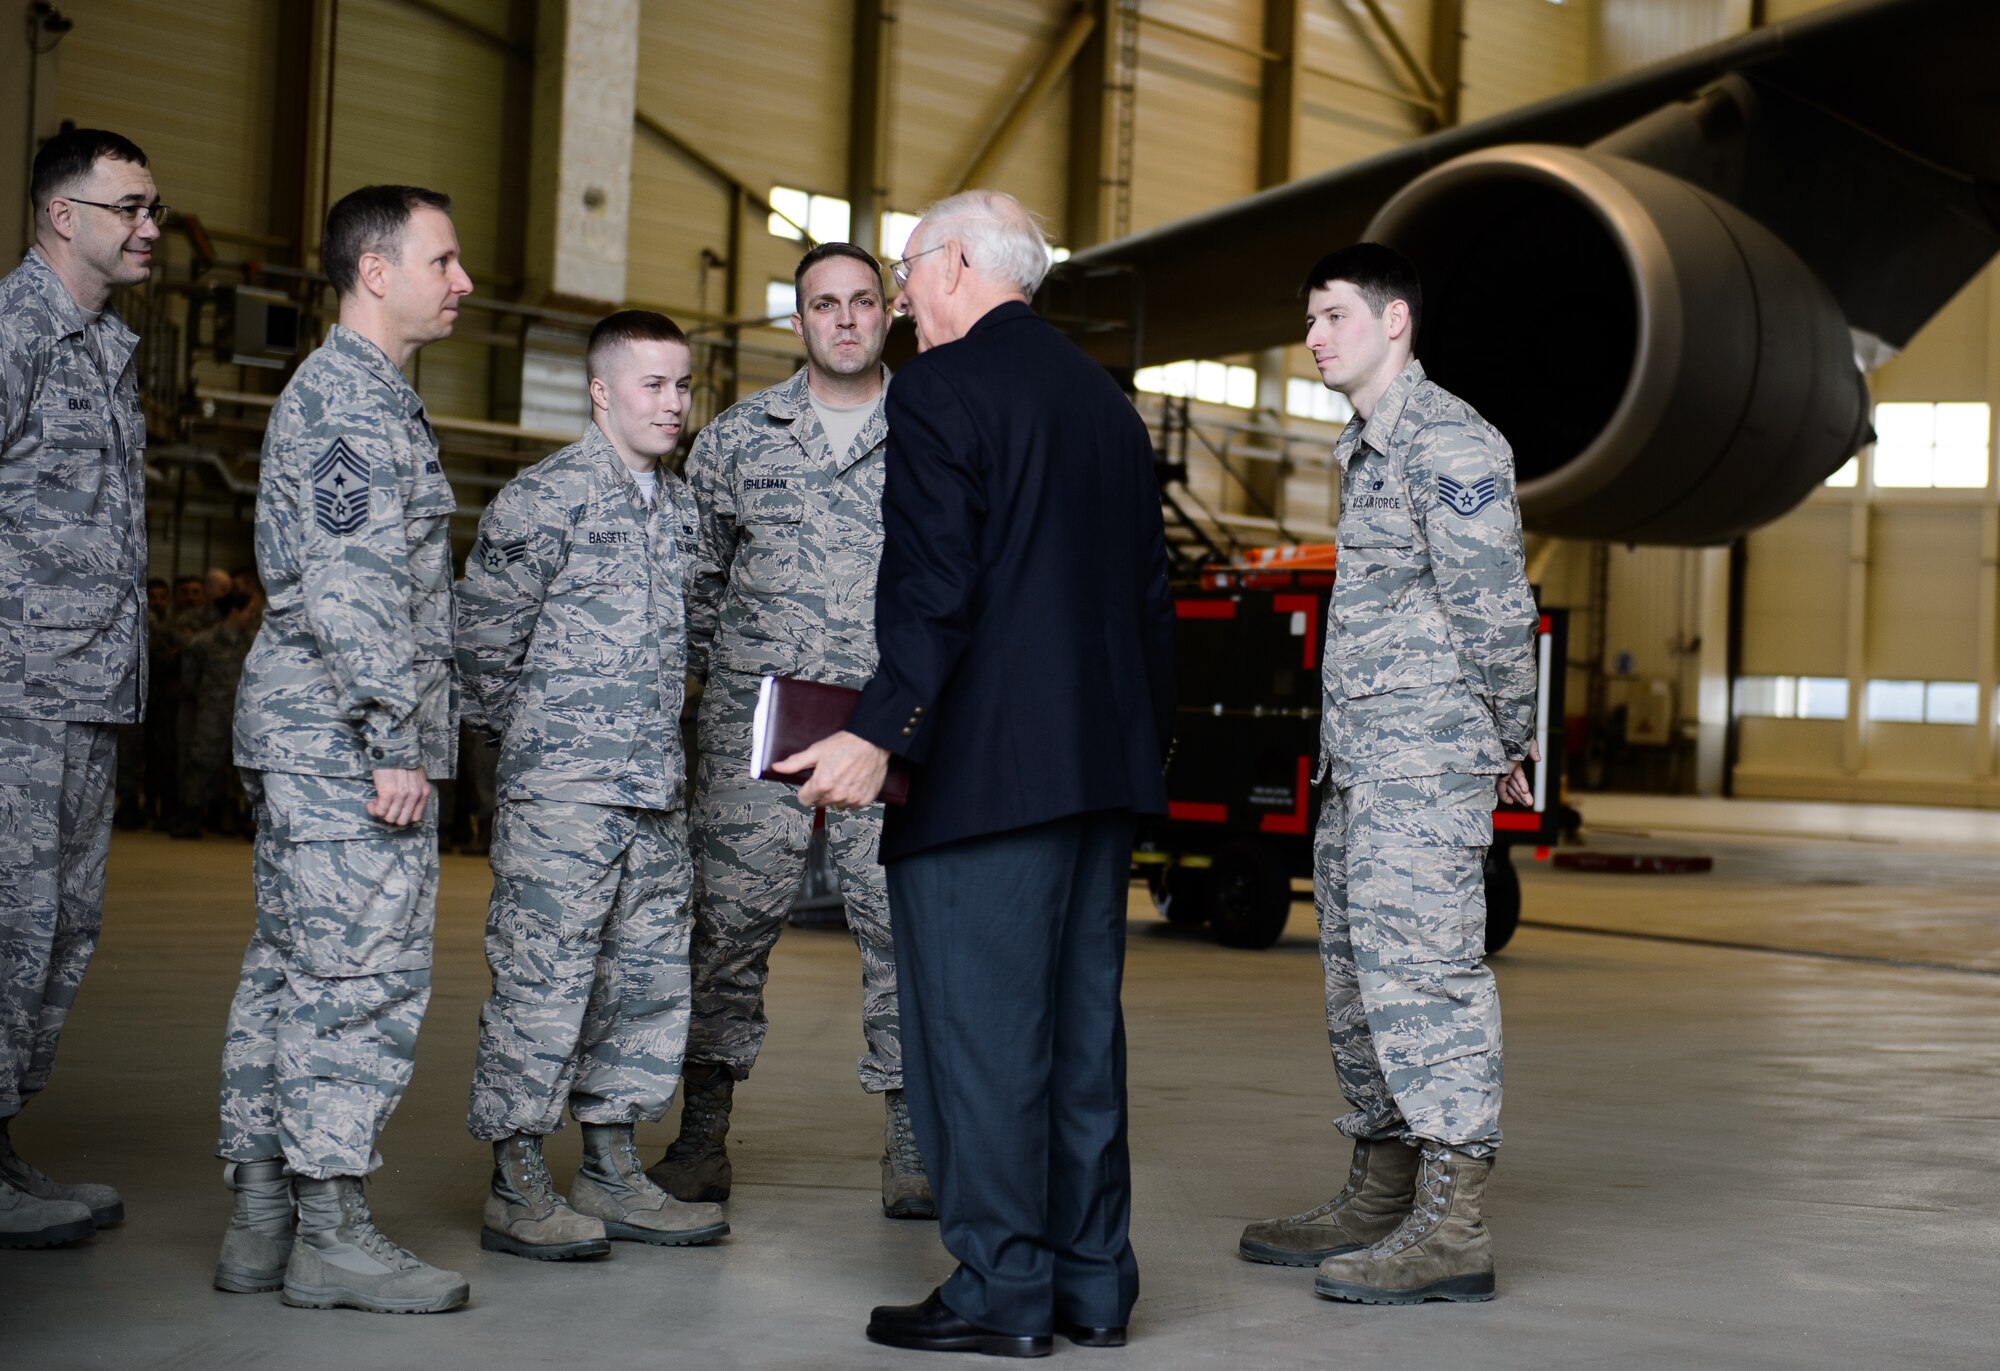 Sam E. Parish, retired Chief Master Sergeant of the Air Force, interacts with Airmen of the 721st Aircraft Maintenance Squadron Jan. 27, 2016, at Ramstein Air Base, Germany. Airmen from the 521st Air Mobility Operations Wing had an opportunity to meet Parish and discuss the differences from when Parish enlisted and the current Air Force. Parish was the guest speaker at a variety of venues including Airman Leadership School, squadron all calls, and the chief induction ceremony as part of his visit. (U.S. Air Force photo/Staff Sgt. Armando A. Schwier-Morales)